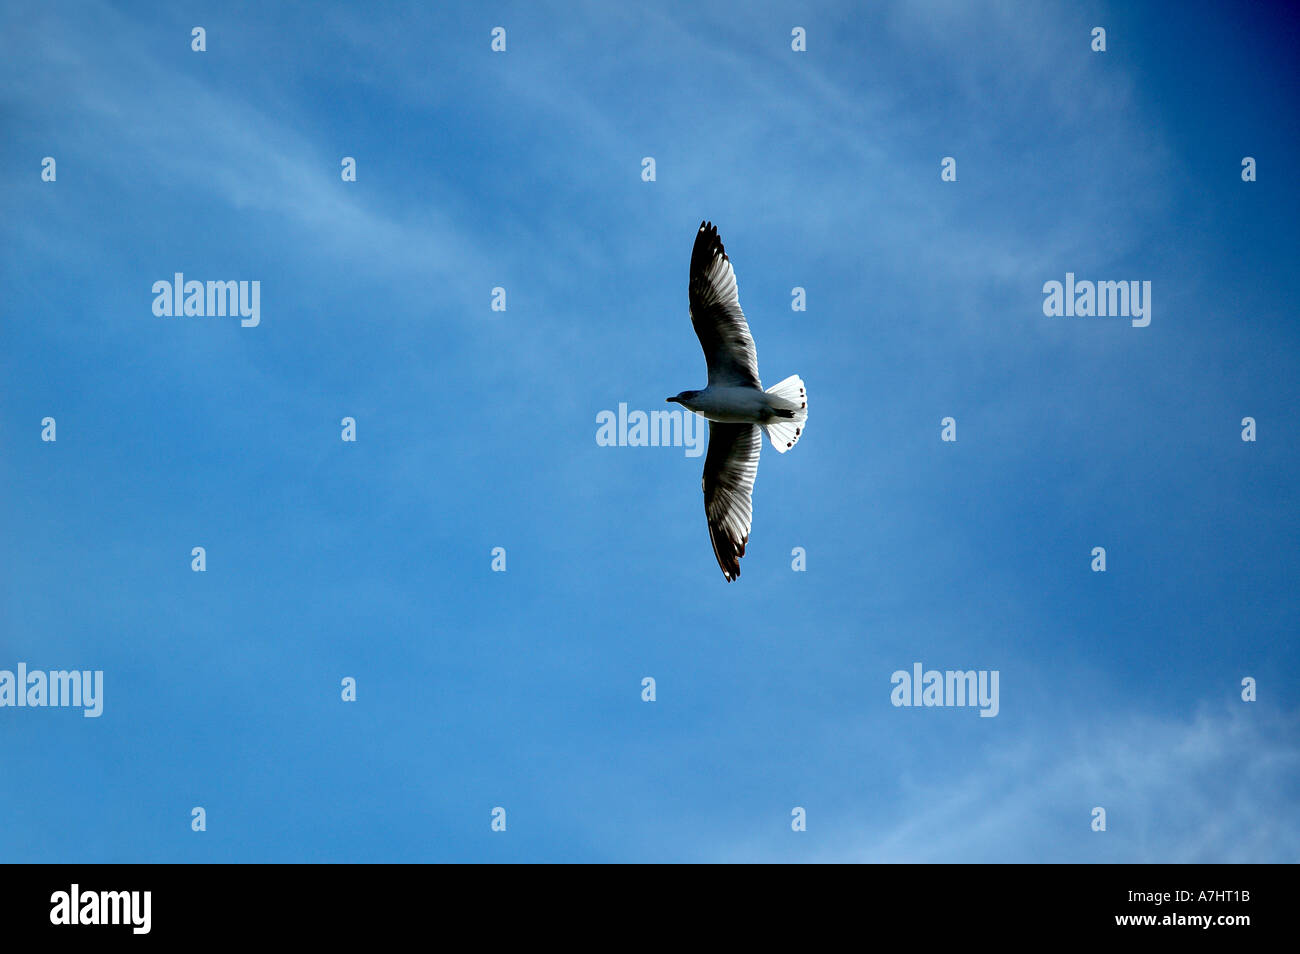 Photograph of a seagull gliding against a clear blue sky Light passing through its wings seagull bird animal blue sky clear day Stock Photo